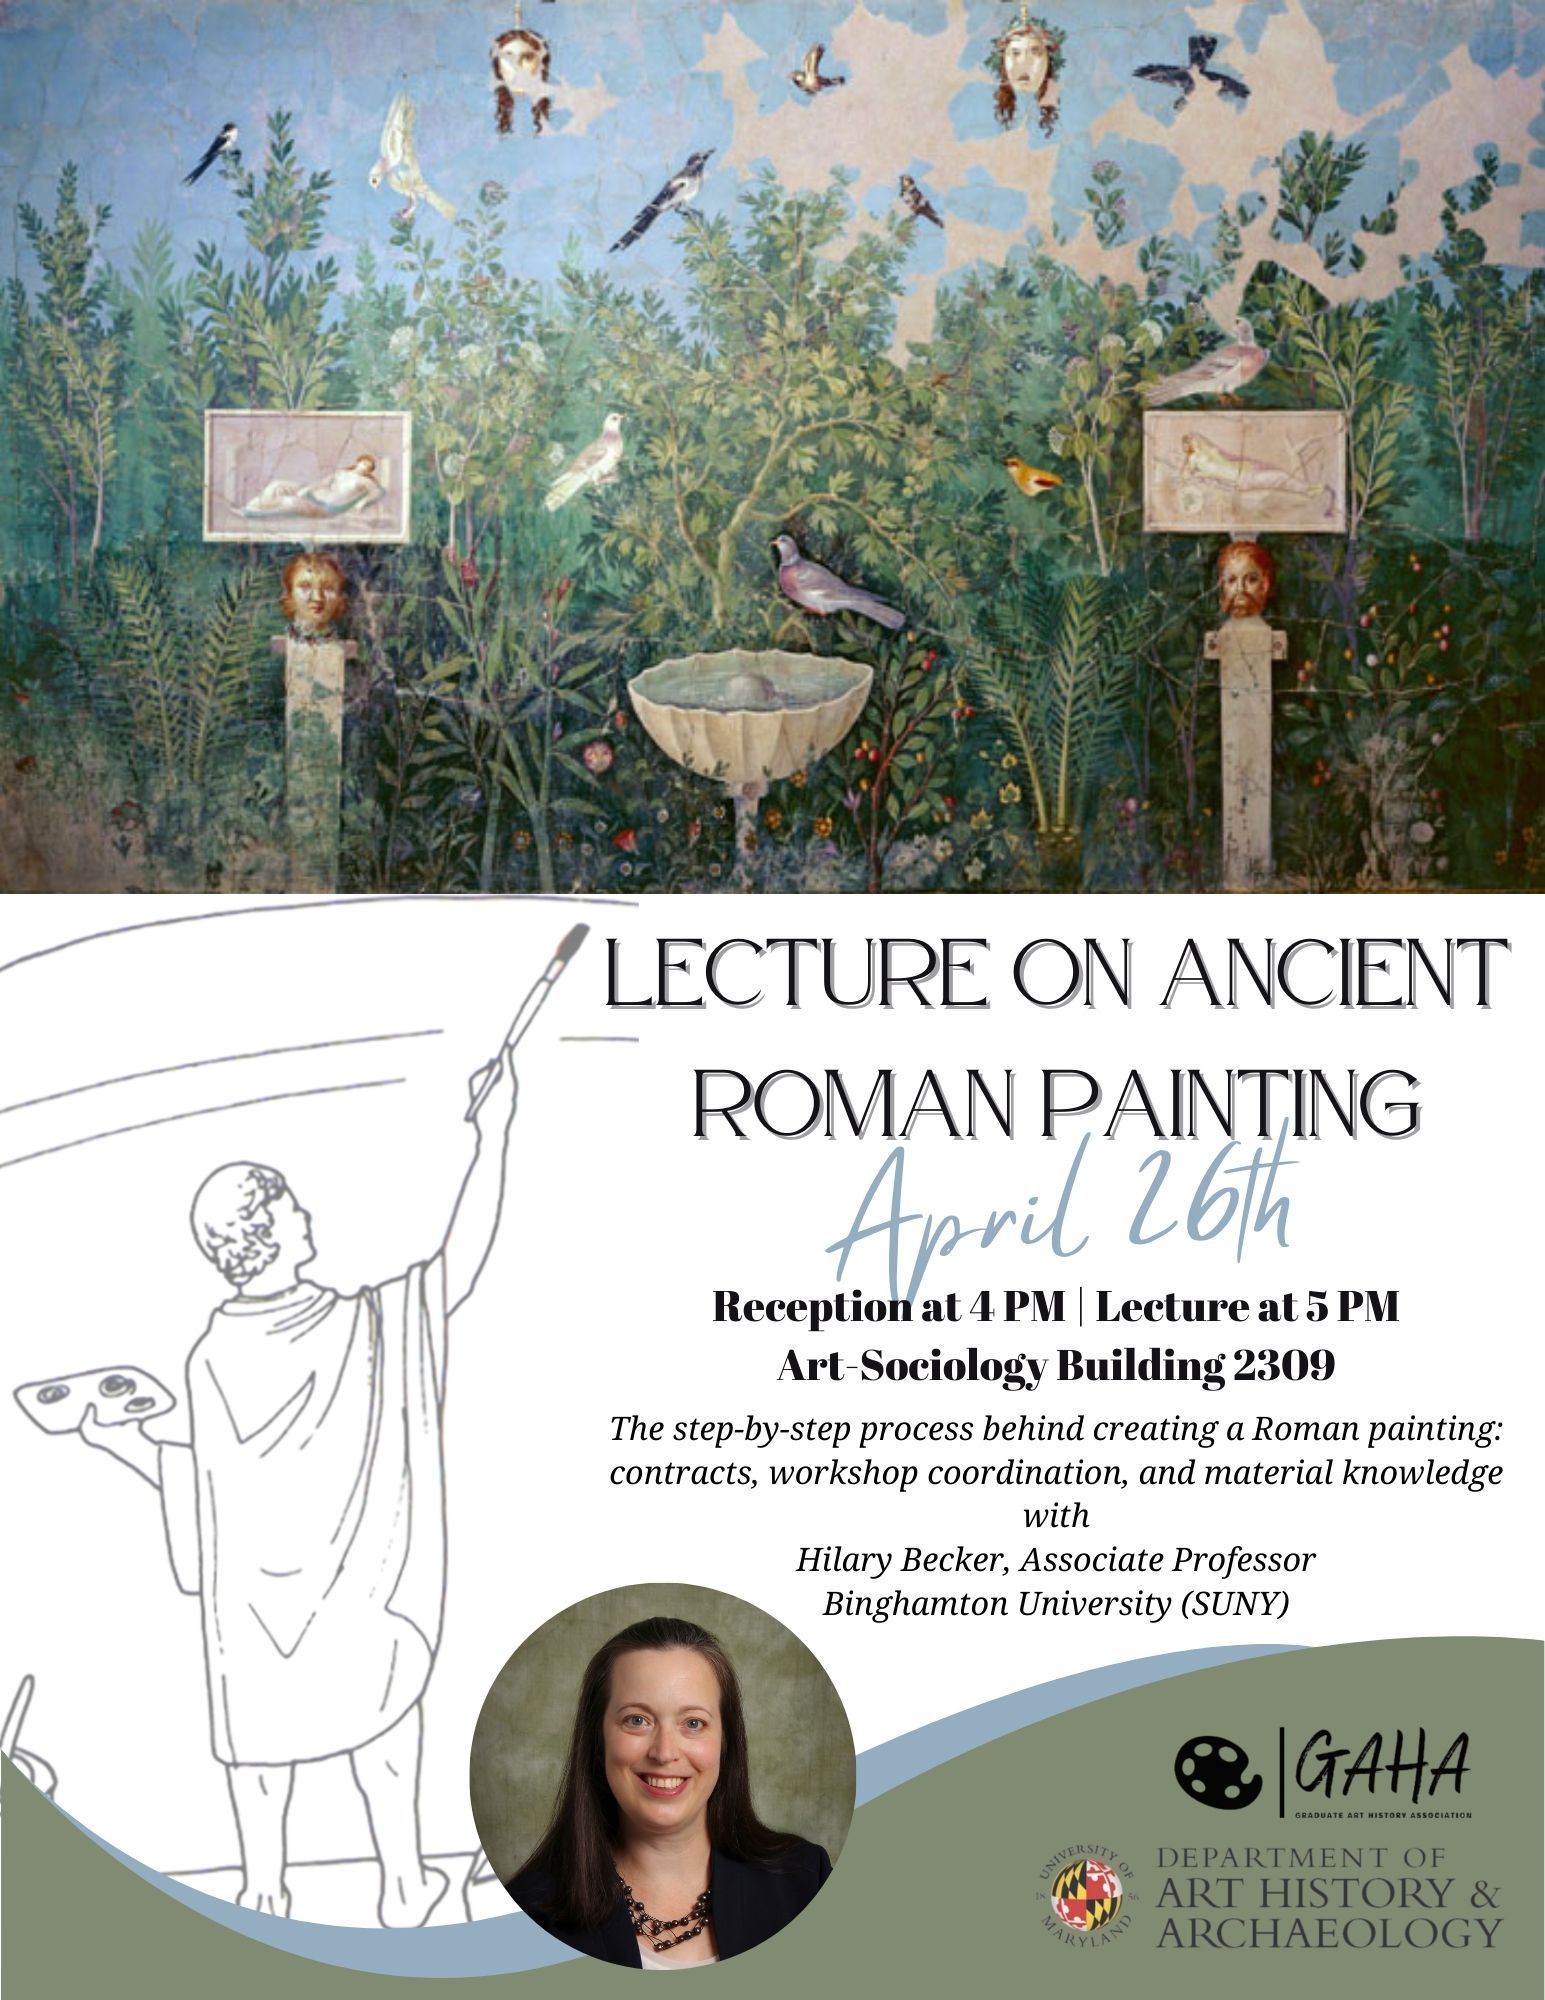 Lecture on Ancient Roman Painting